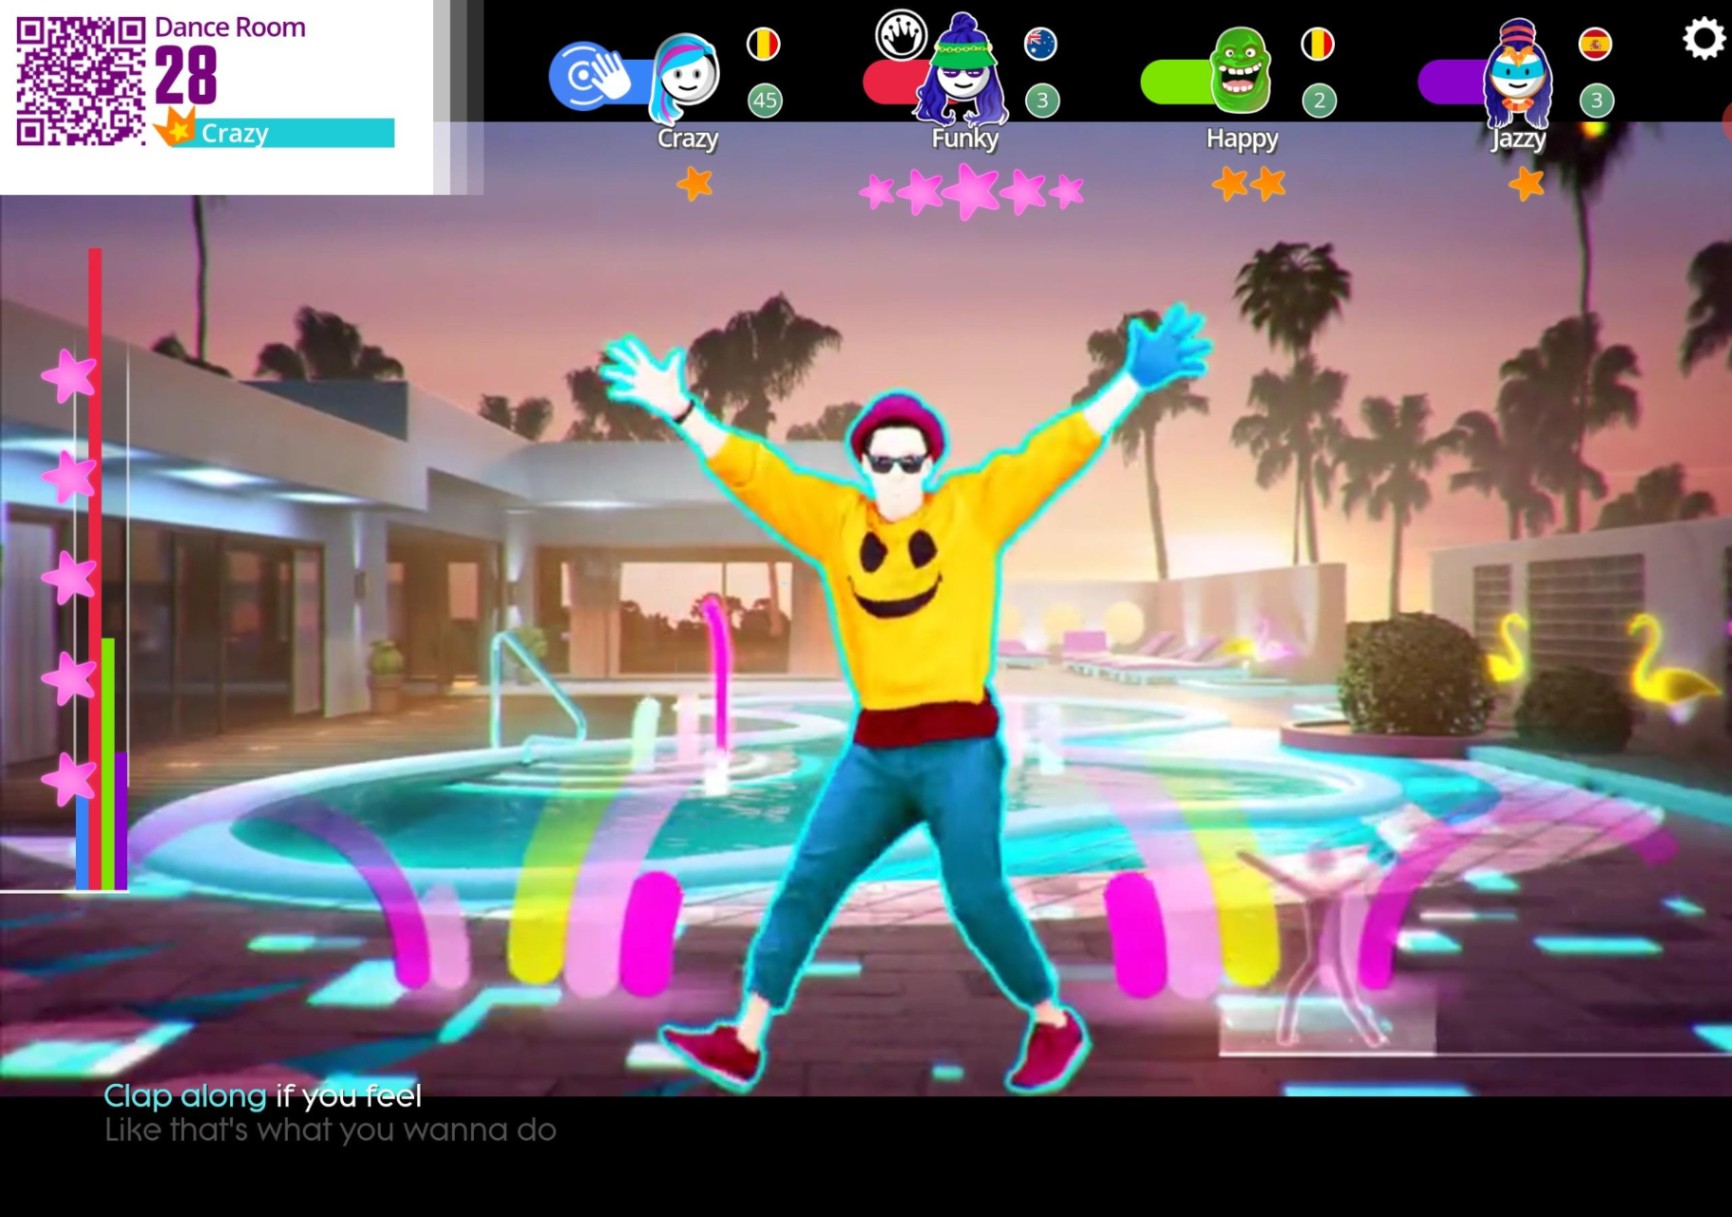 Just Dance Now Game - Learn how to connect to your computer, coins and more